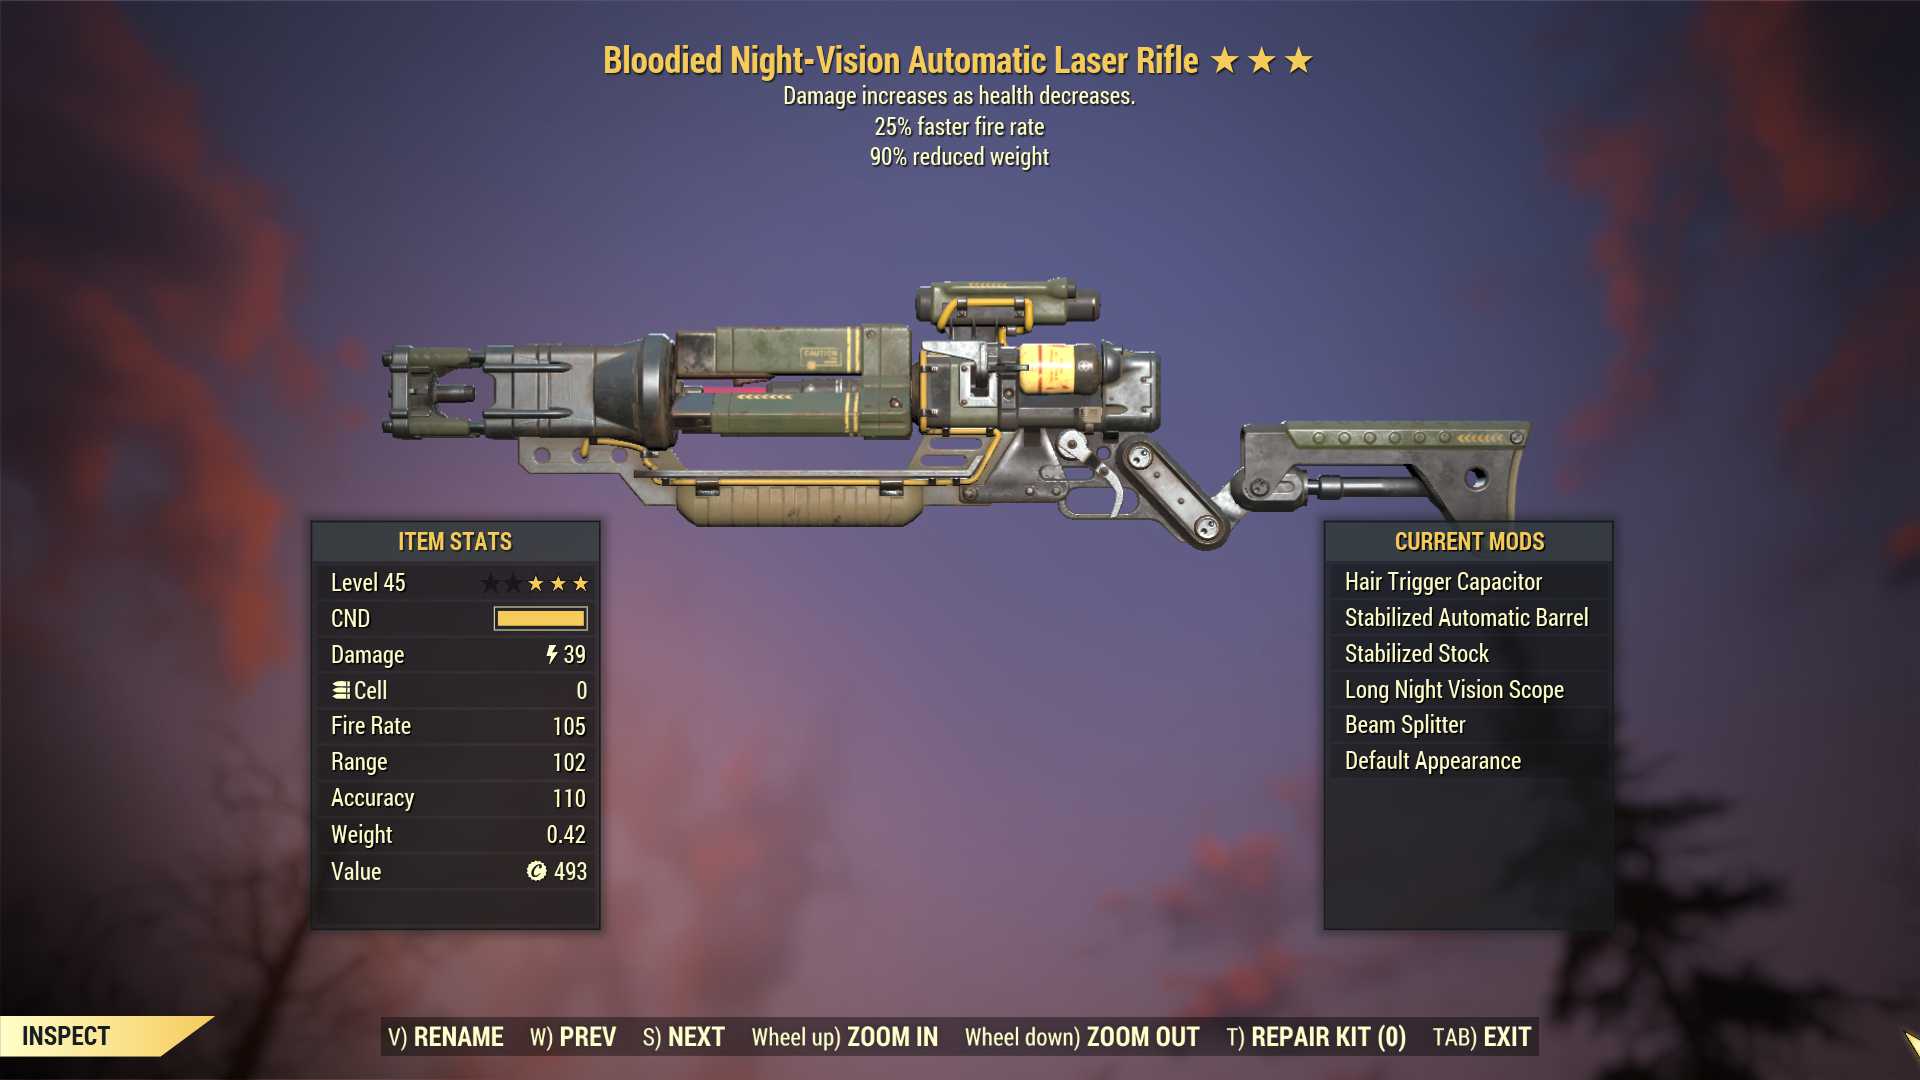 Bloodied Laser rifle (25% faster fire rate, 90% reduced weight)